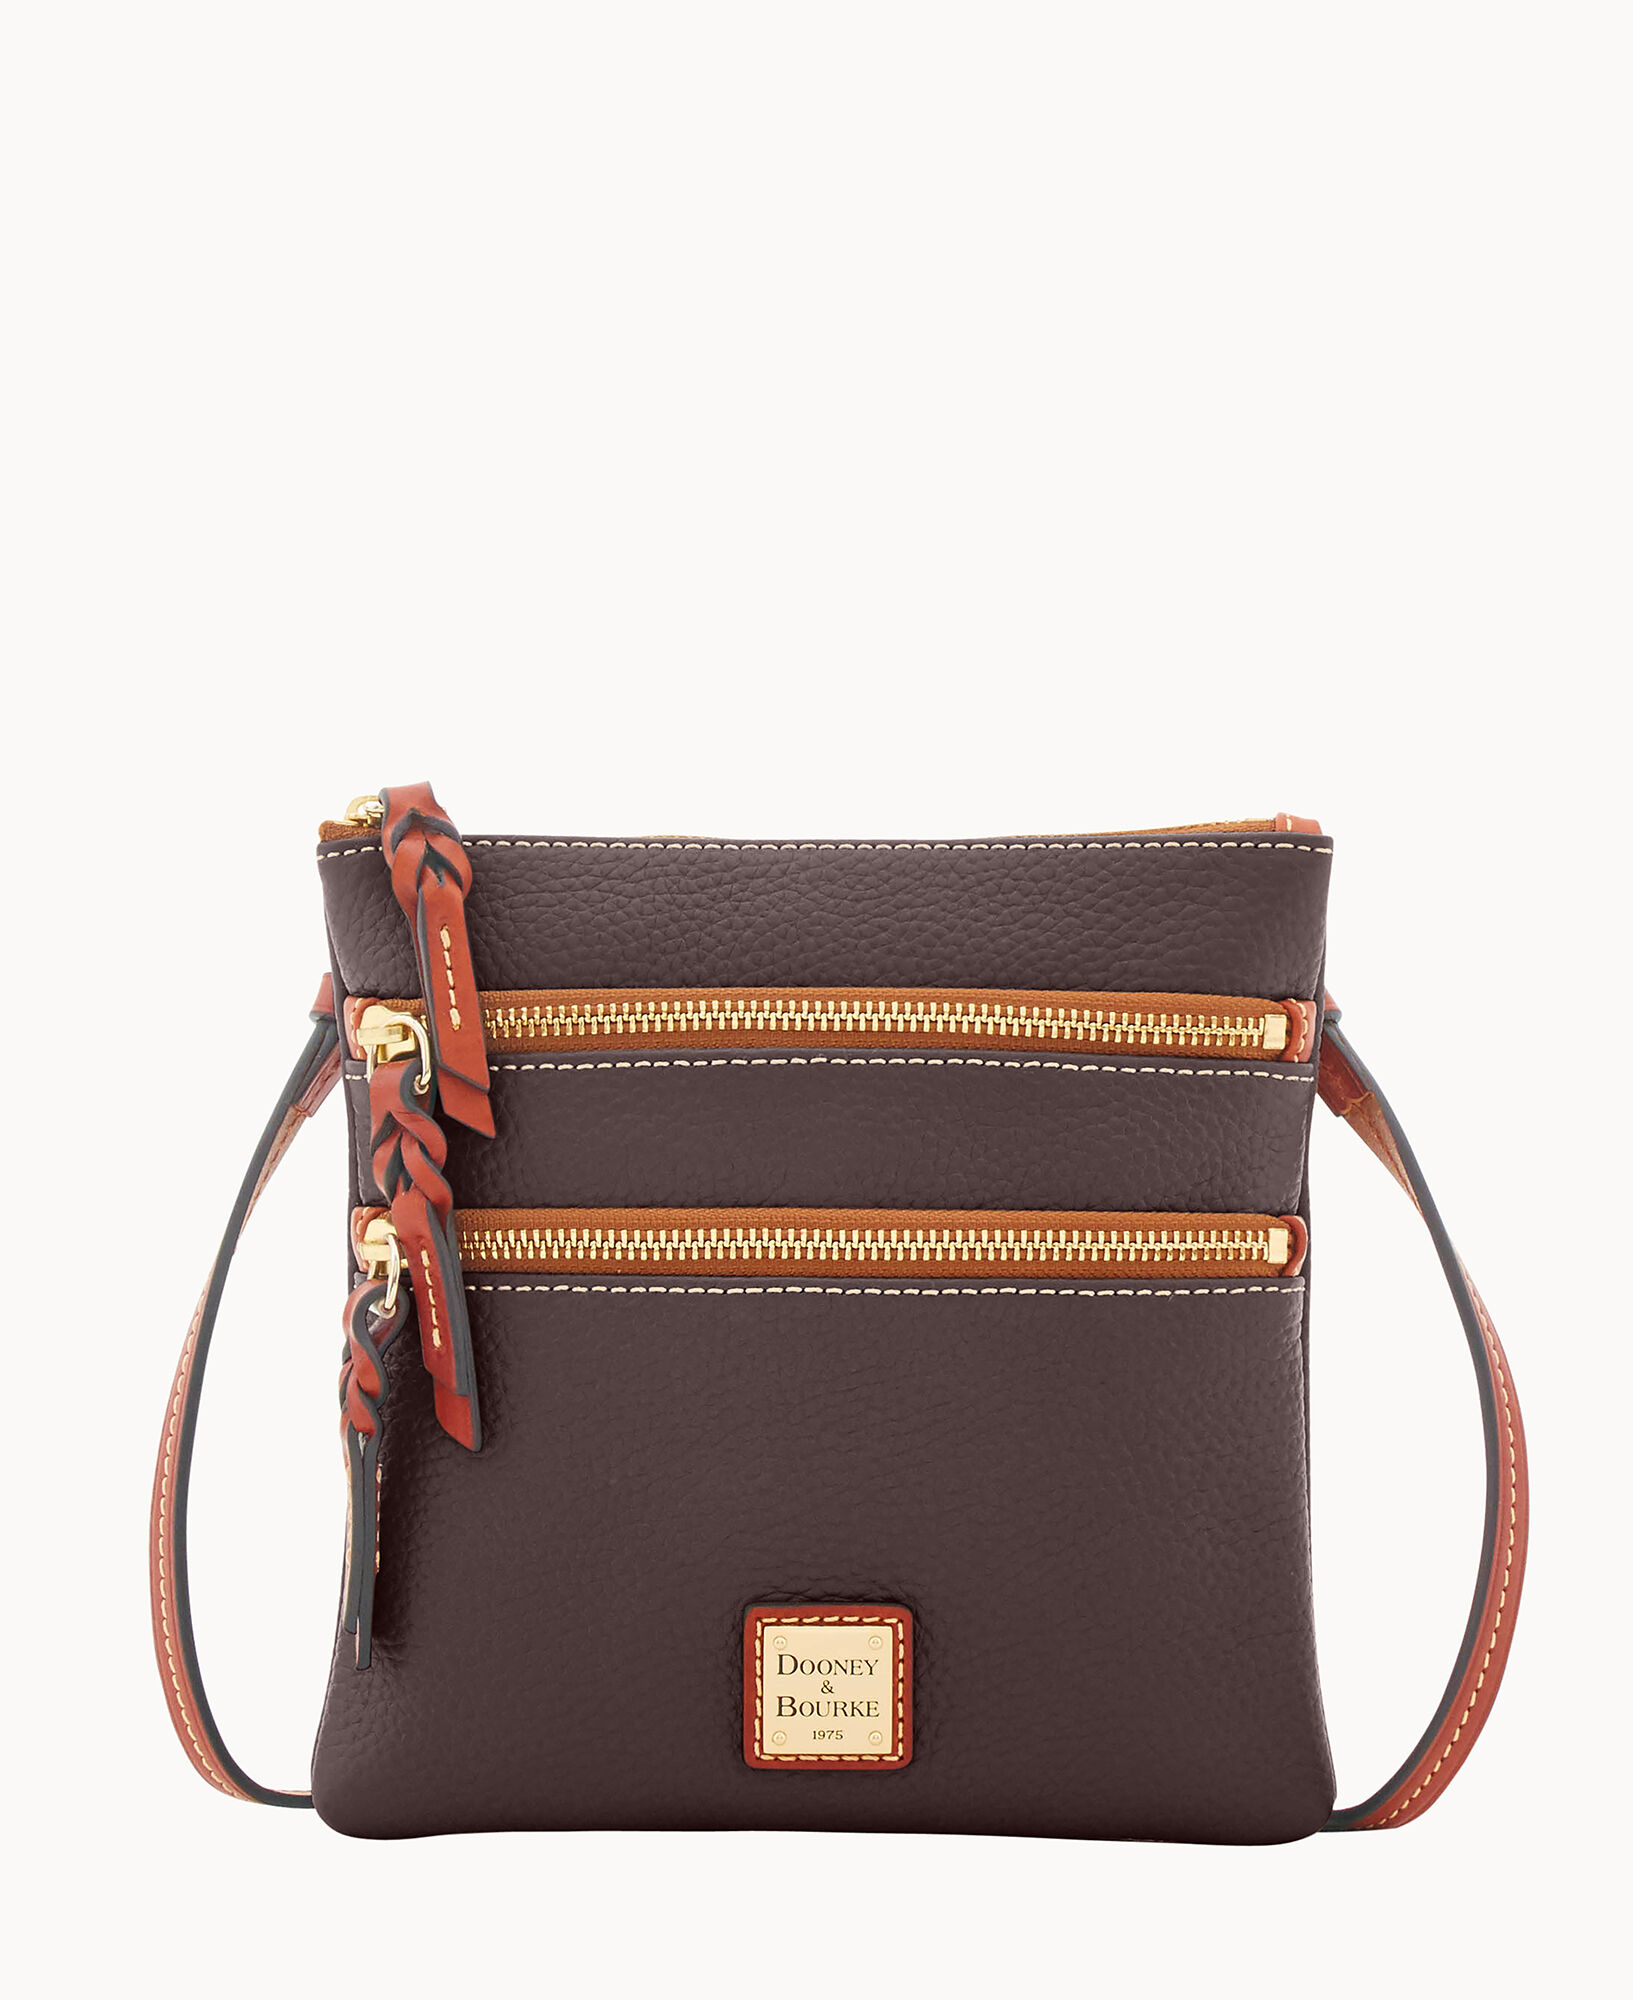 Outlet Express - New! Dooney & Bourke Pebble Leather Crossbody in  “Graphite” 🤍 SOLD